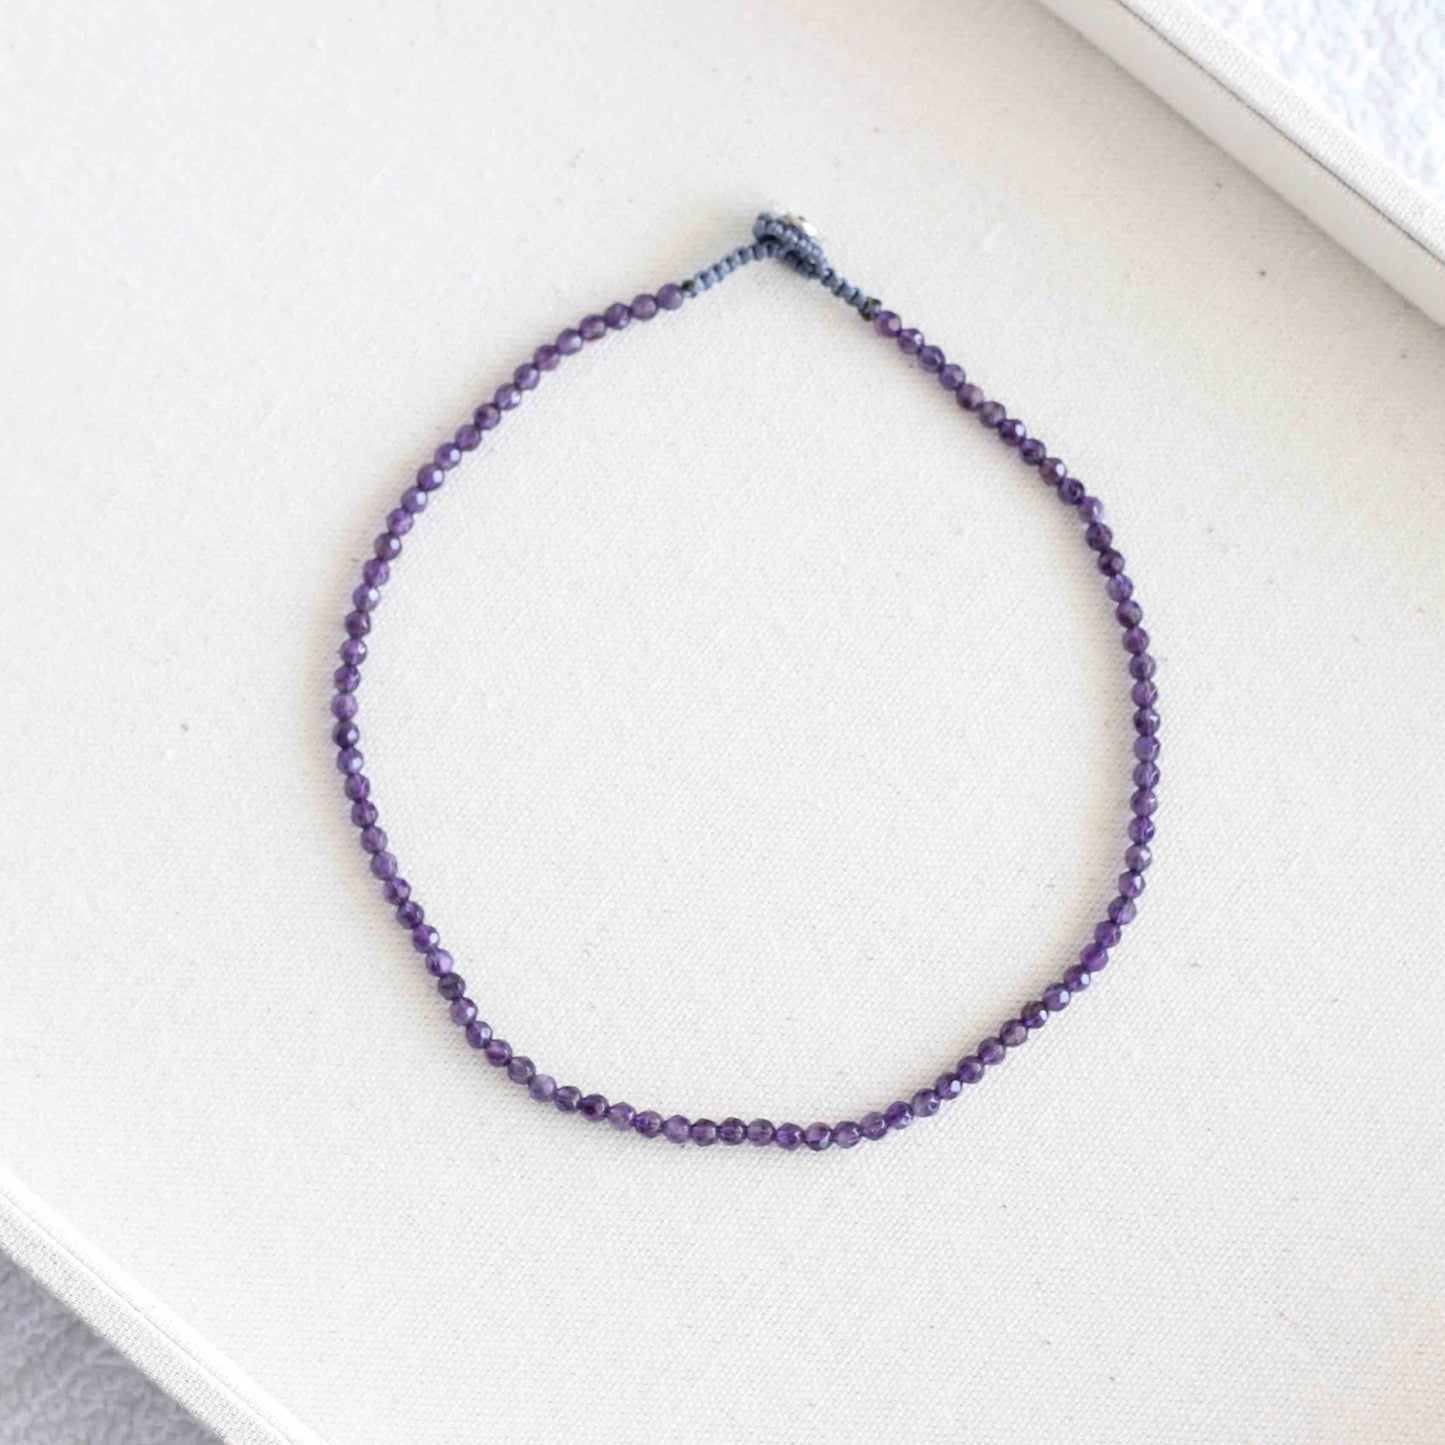 Handmade Minimal Choker Amethyst Necklace with 925 Sterling Silver Closure